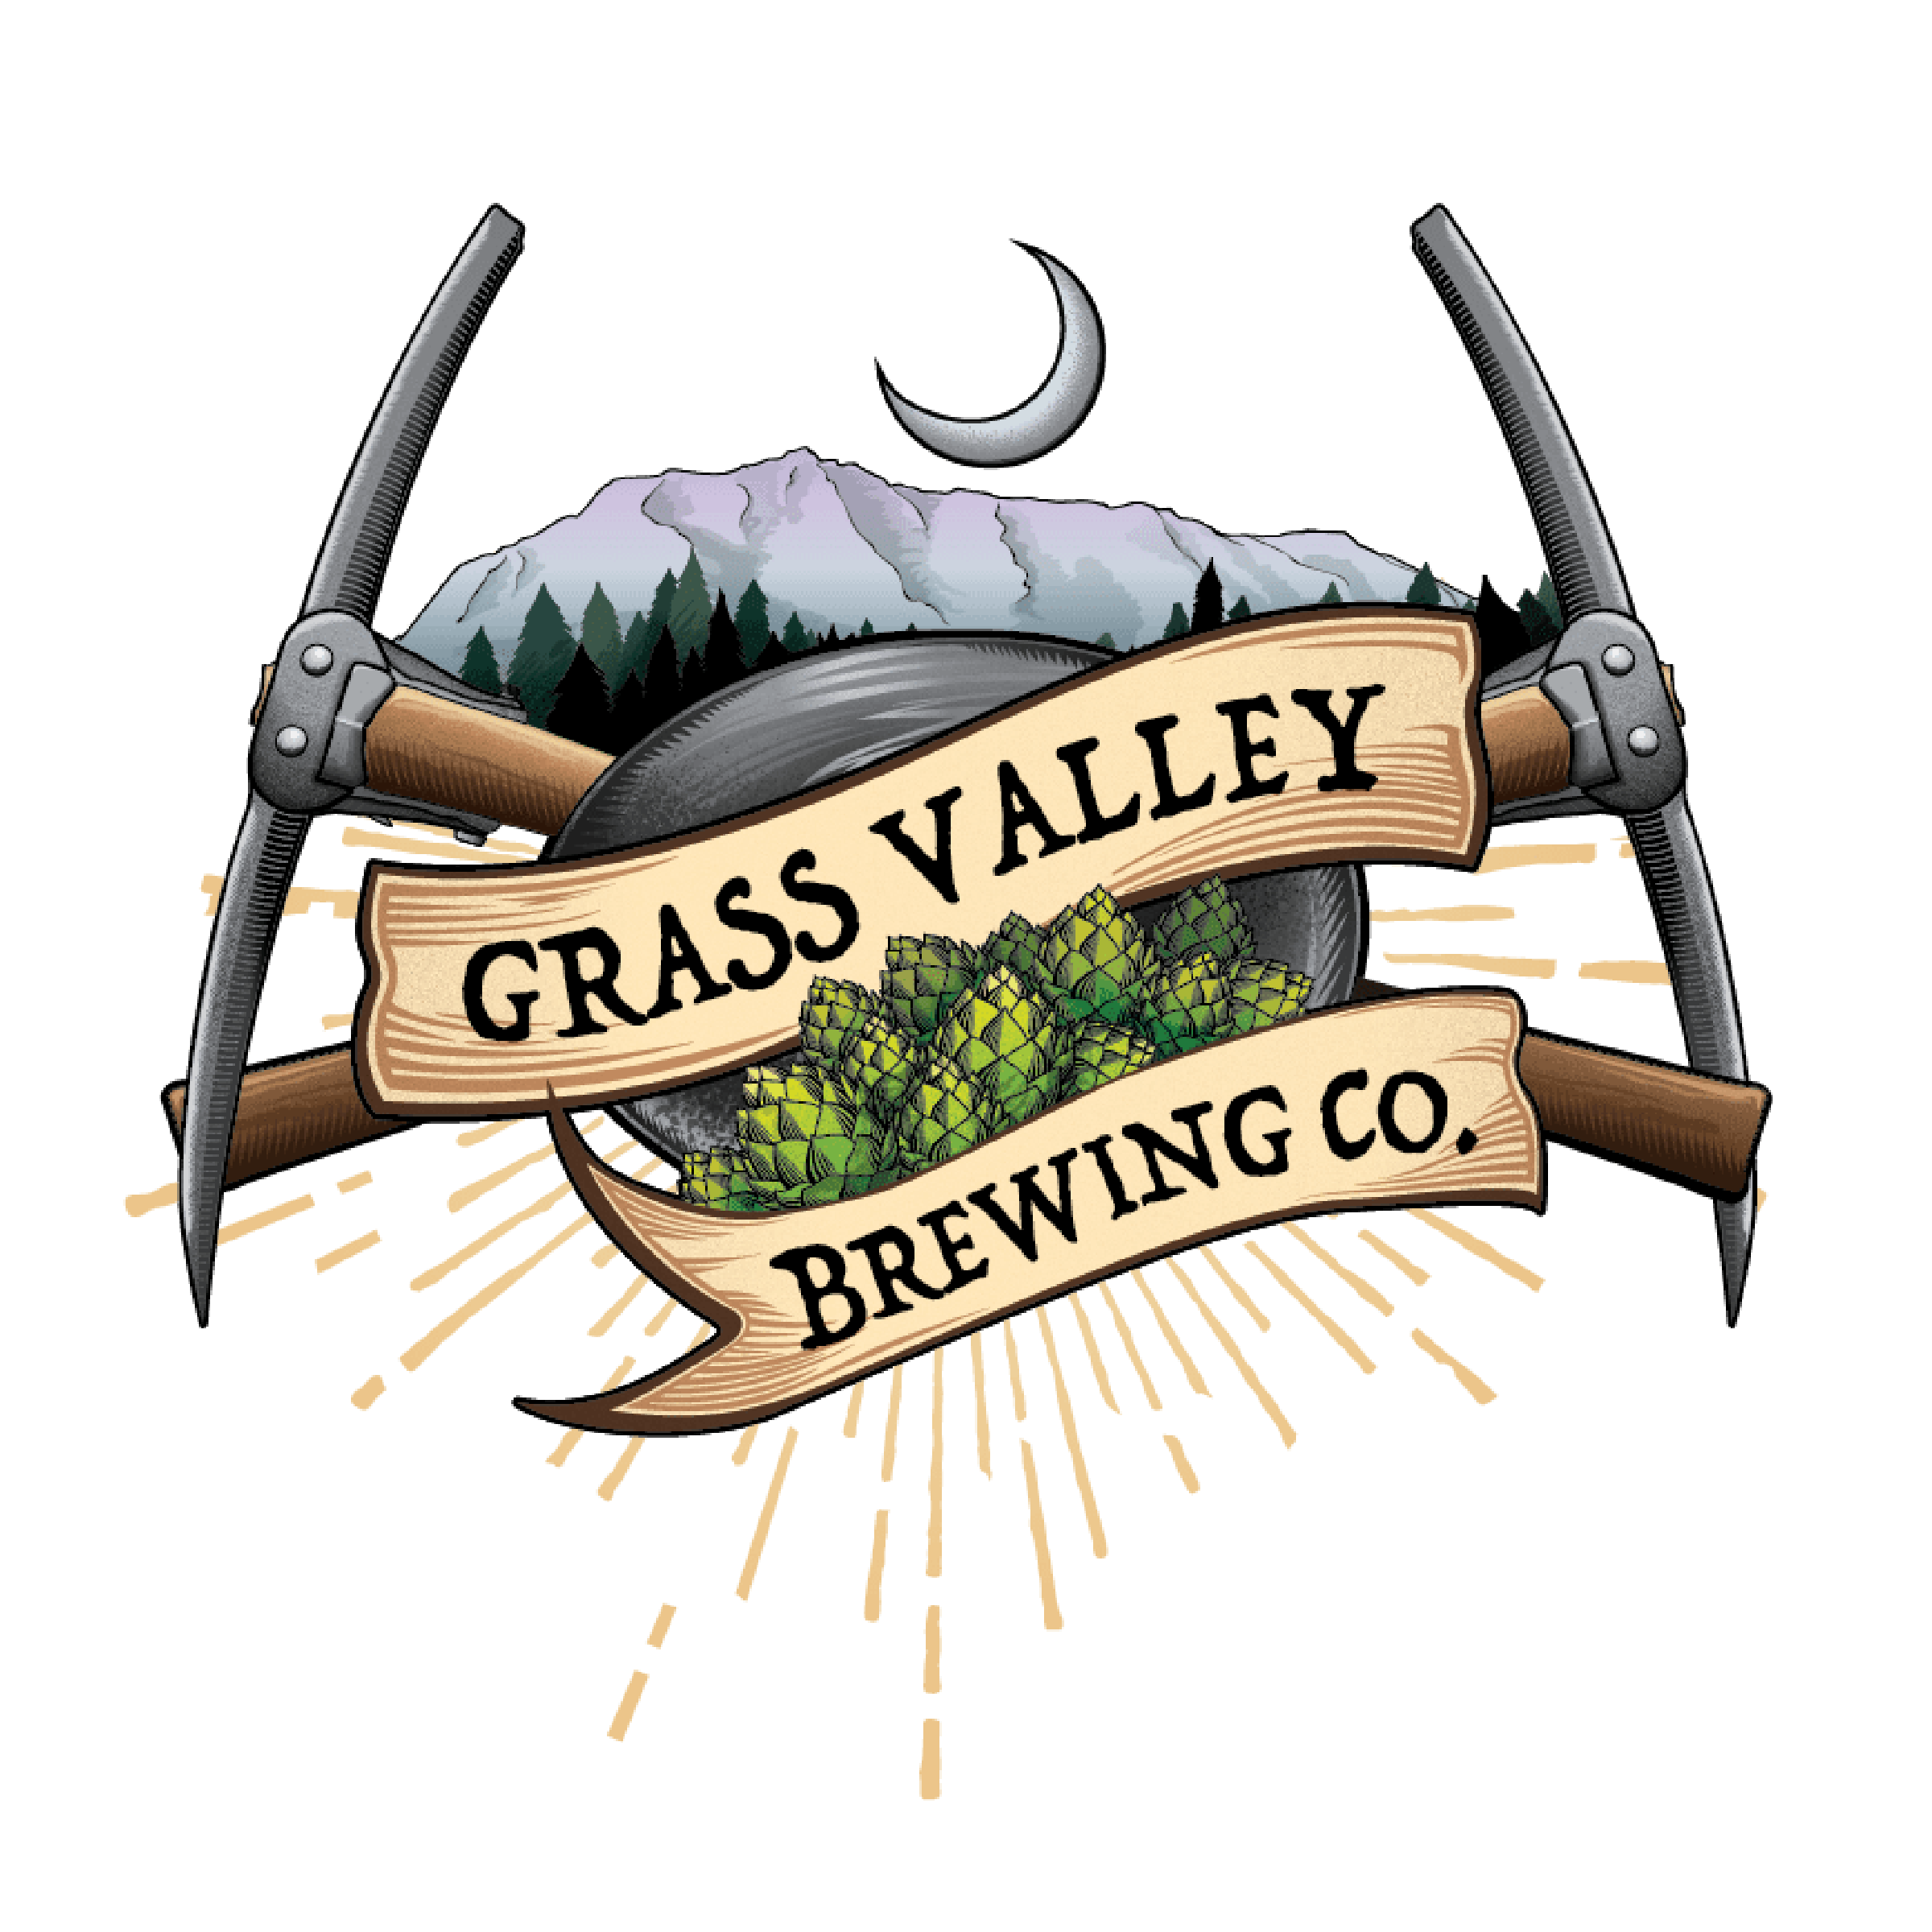 Grass Valley Brewing Co.